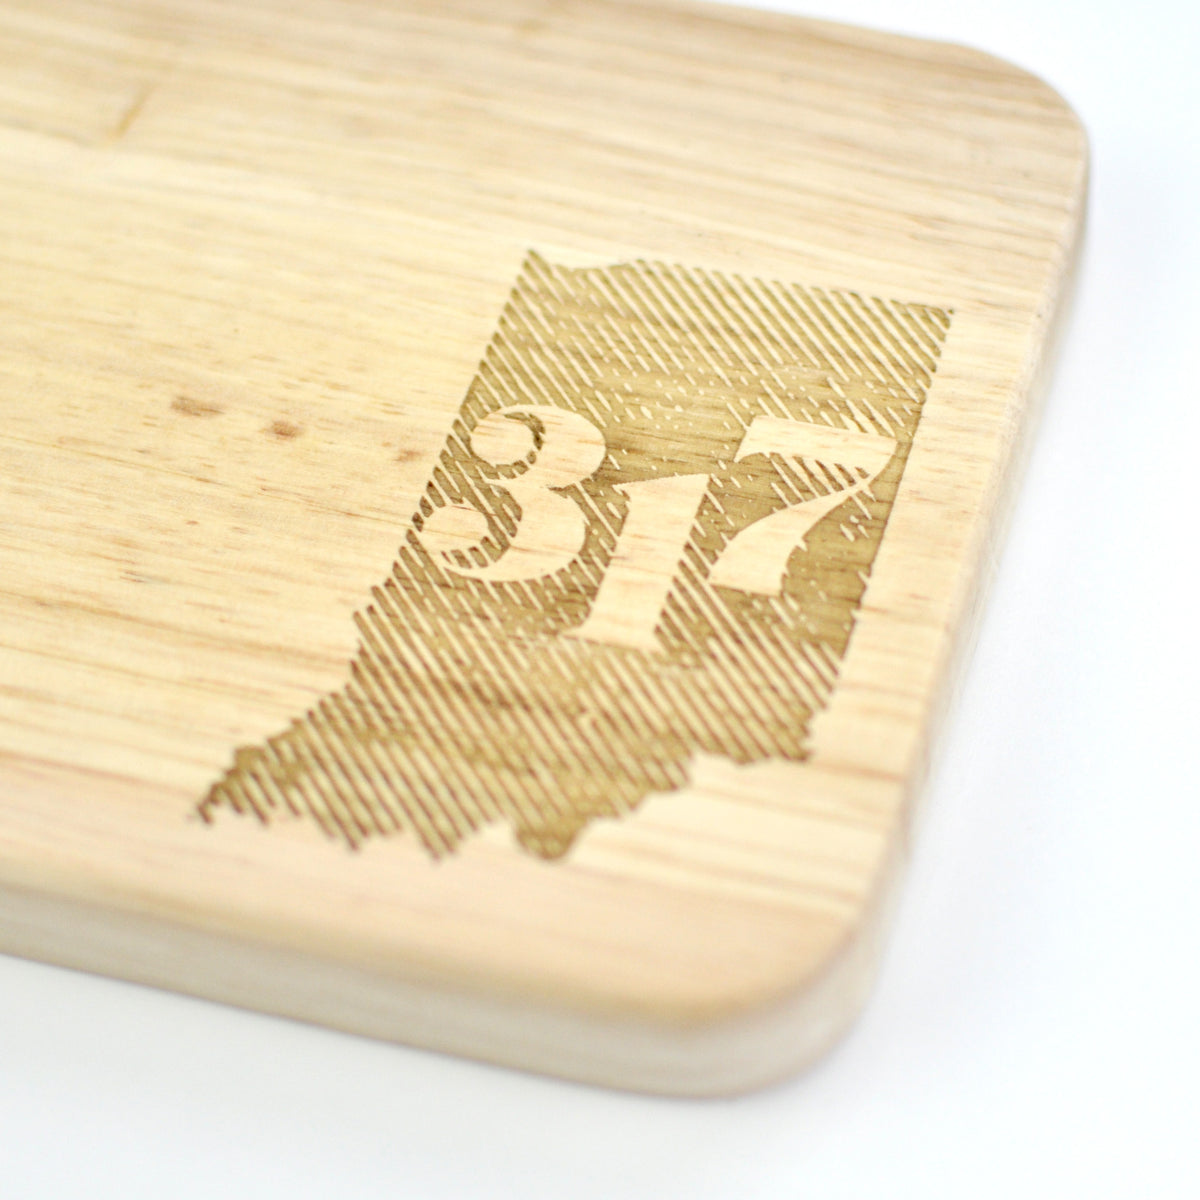 Large Home State Serving Board Customized by You!